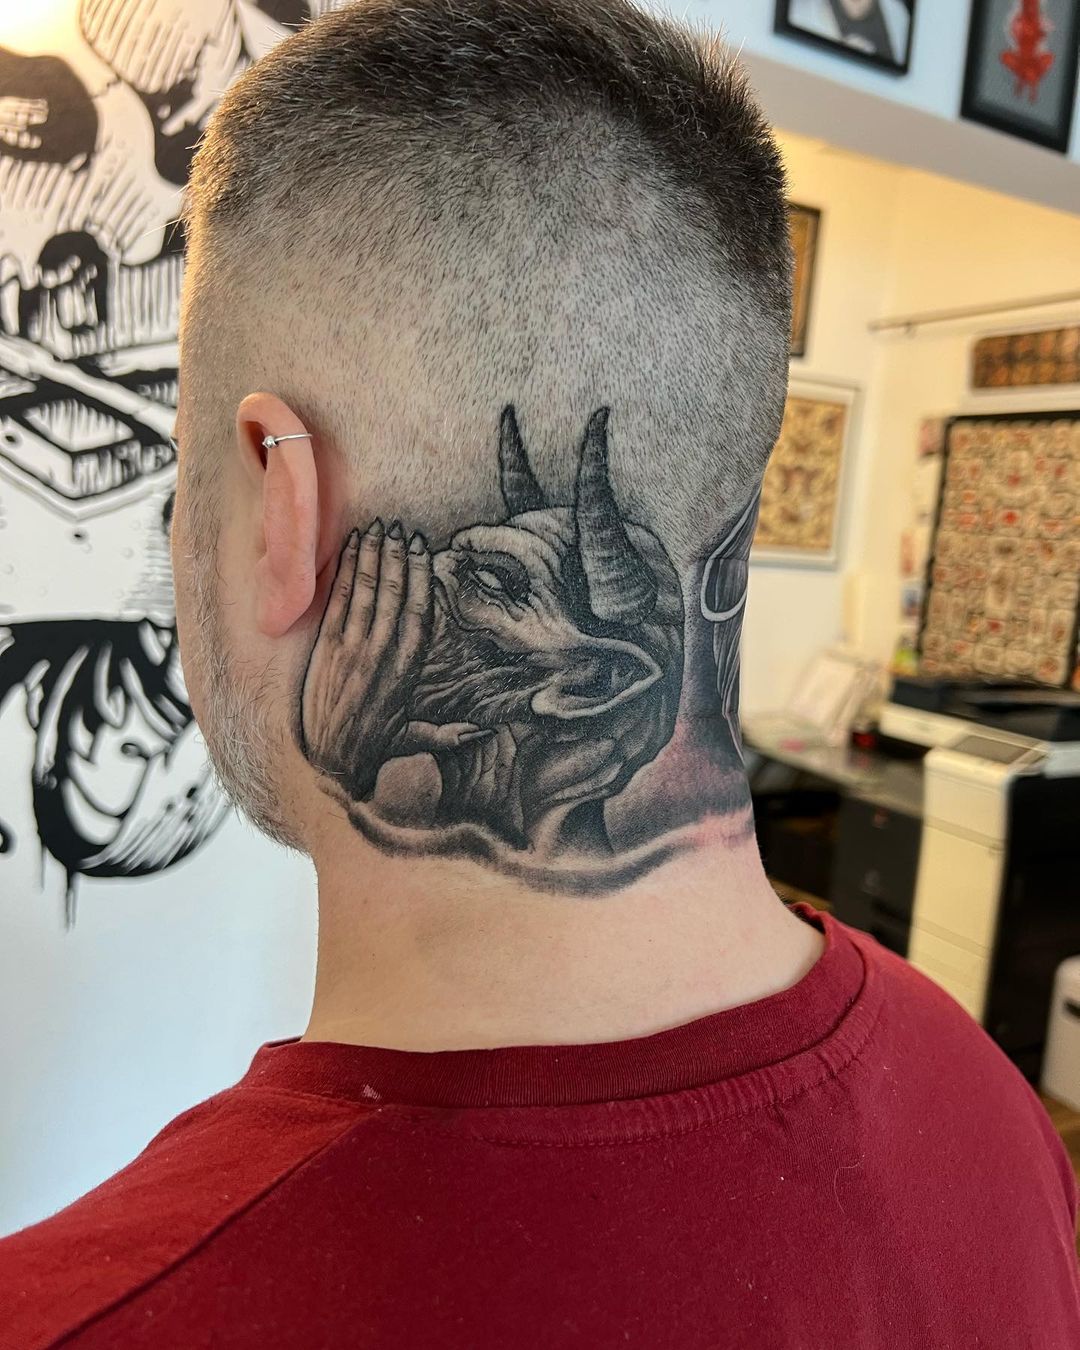 Devil whispering to ear tattoo  For Business inquiries Dm me tattoo  devilwhispertattoo devilwhisper tattooinspiration tattooideas   Instagram